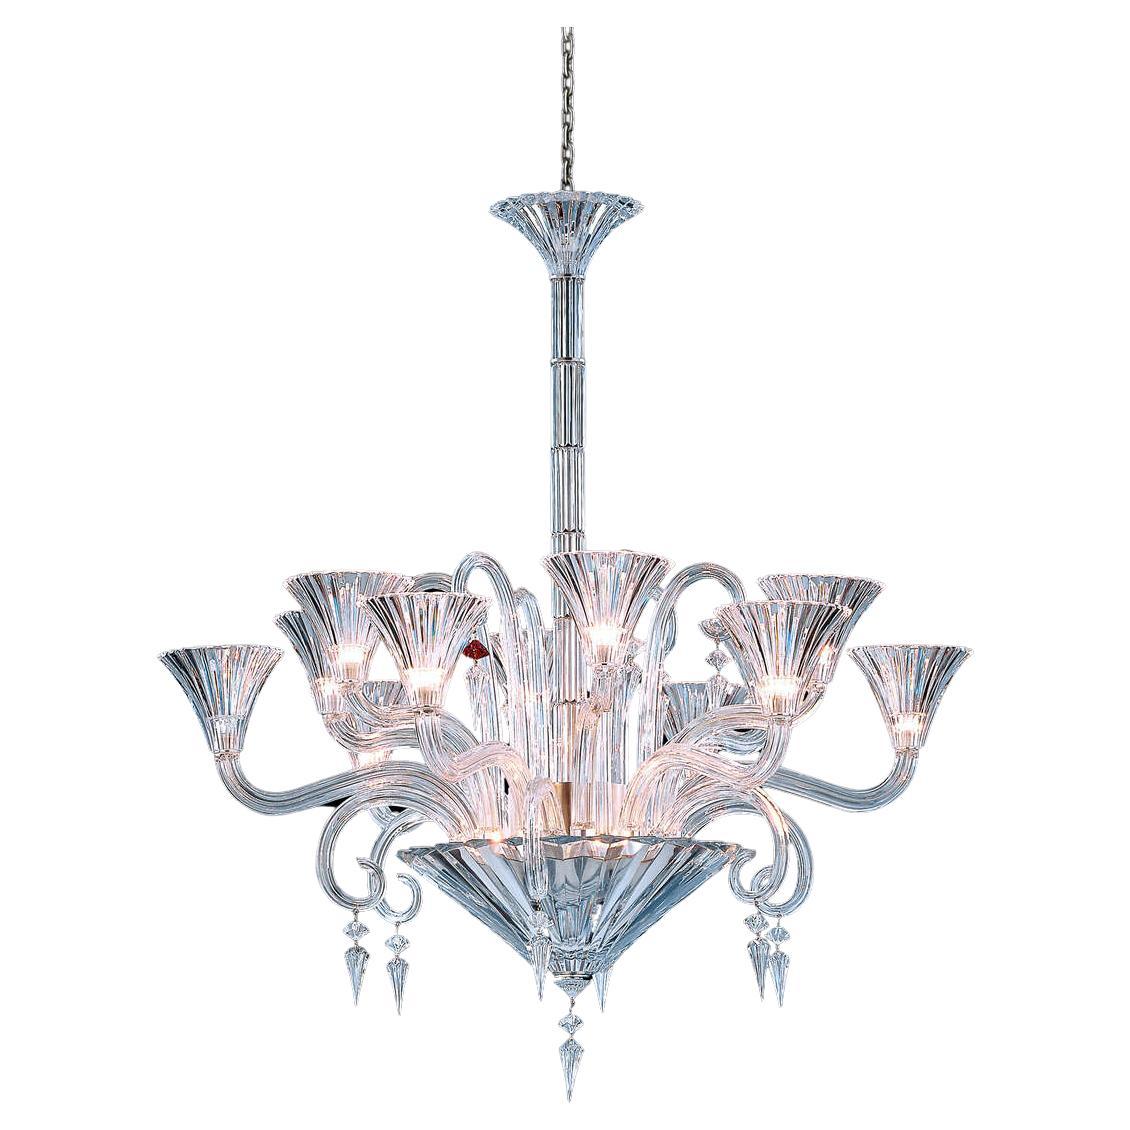 Large Exquisite French Baccarat Crystal Mille Nuits Twelve Light Chandelier For Sale